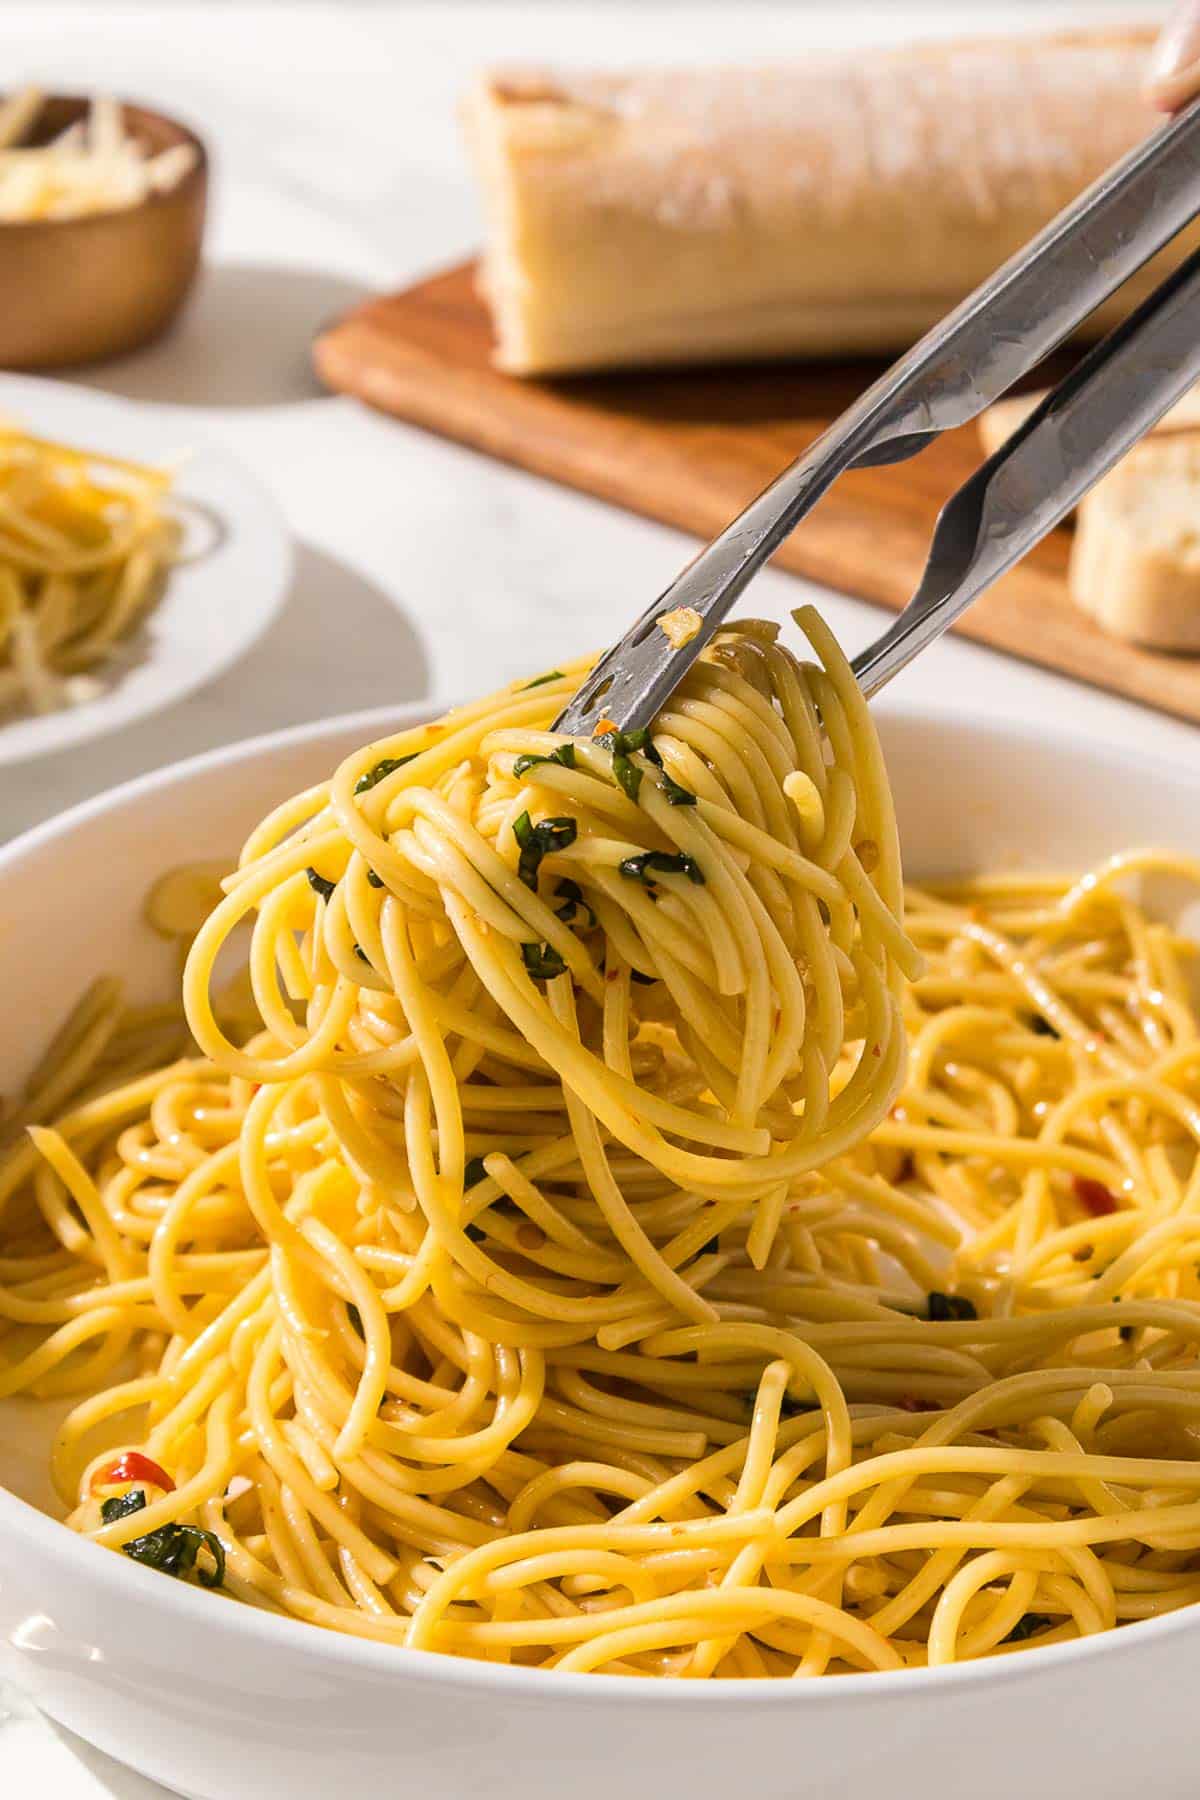 A person is holding a pair of tongs over a bowl of spaghetti aglio olio e peperoncino.